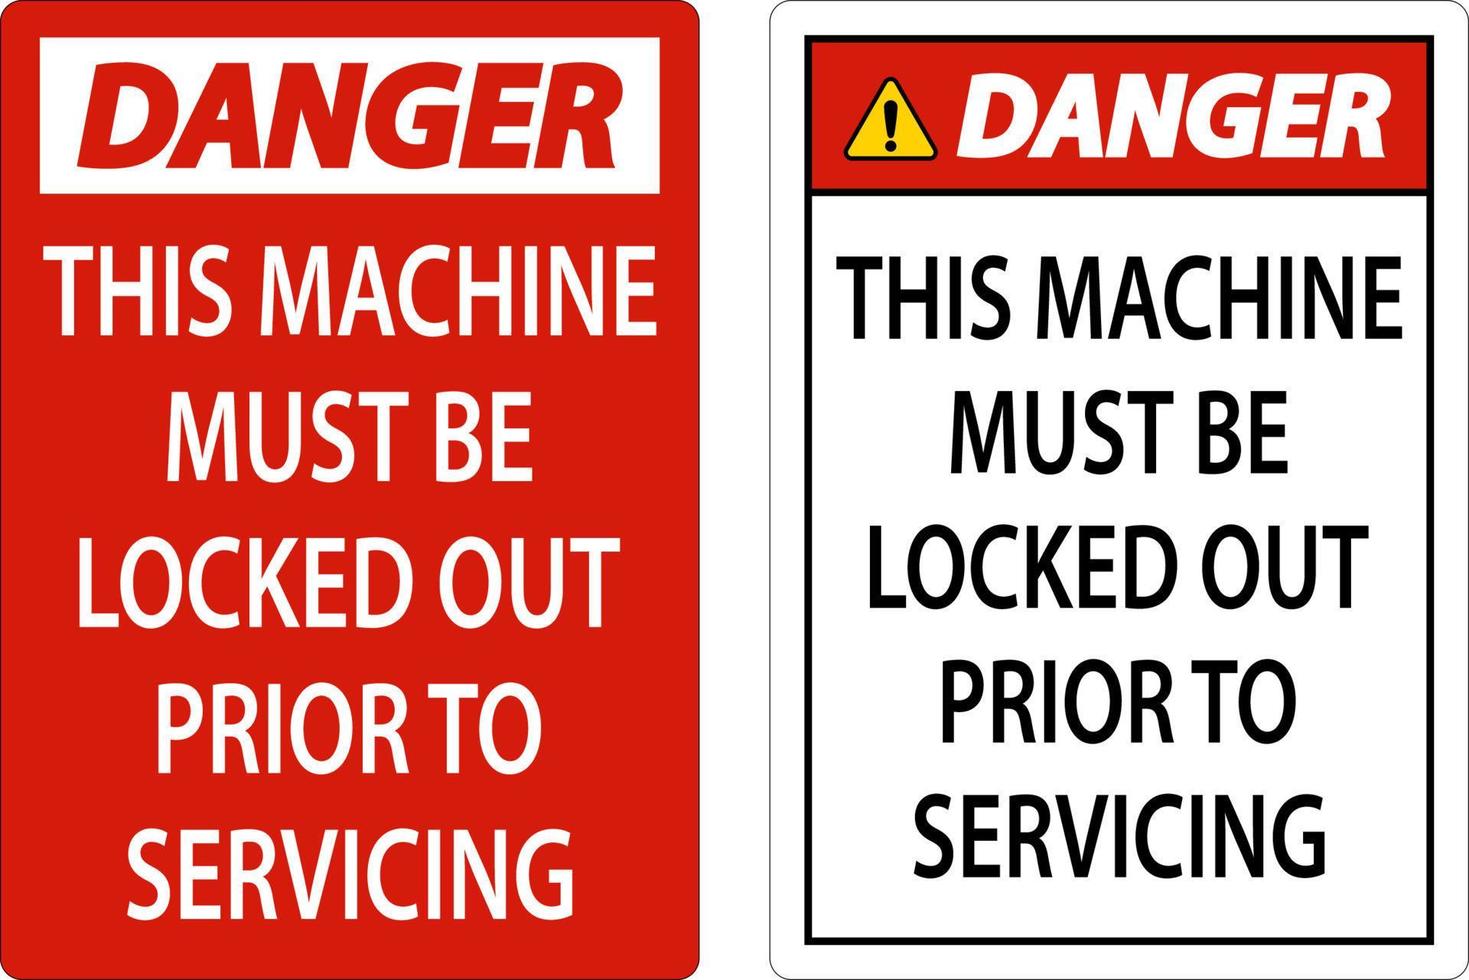 Danger This Machine Must Be Locked Out Prior To Servicing Sign vector